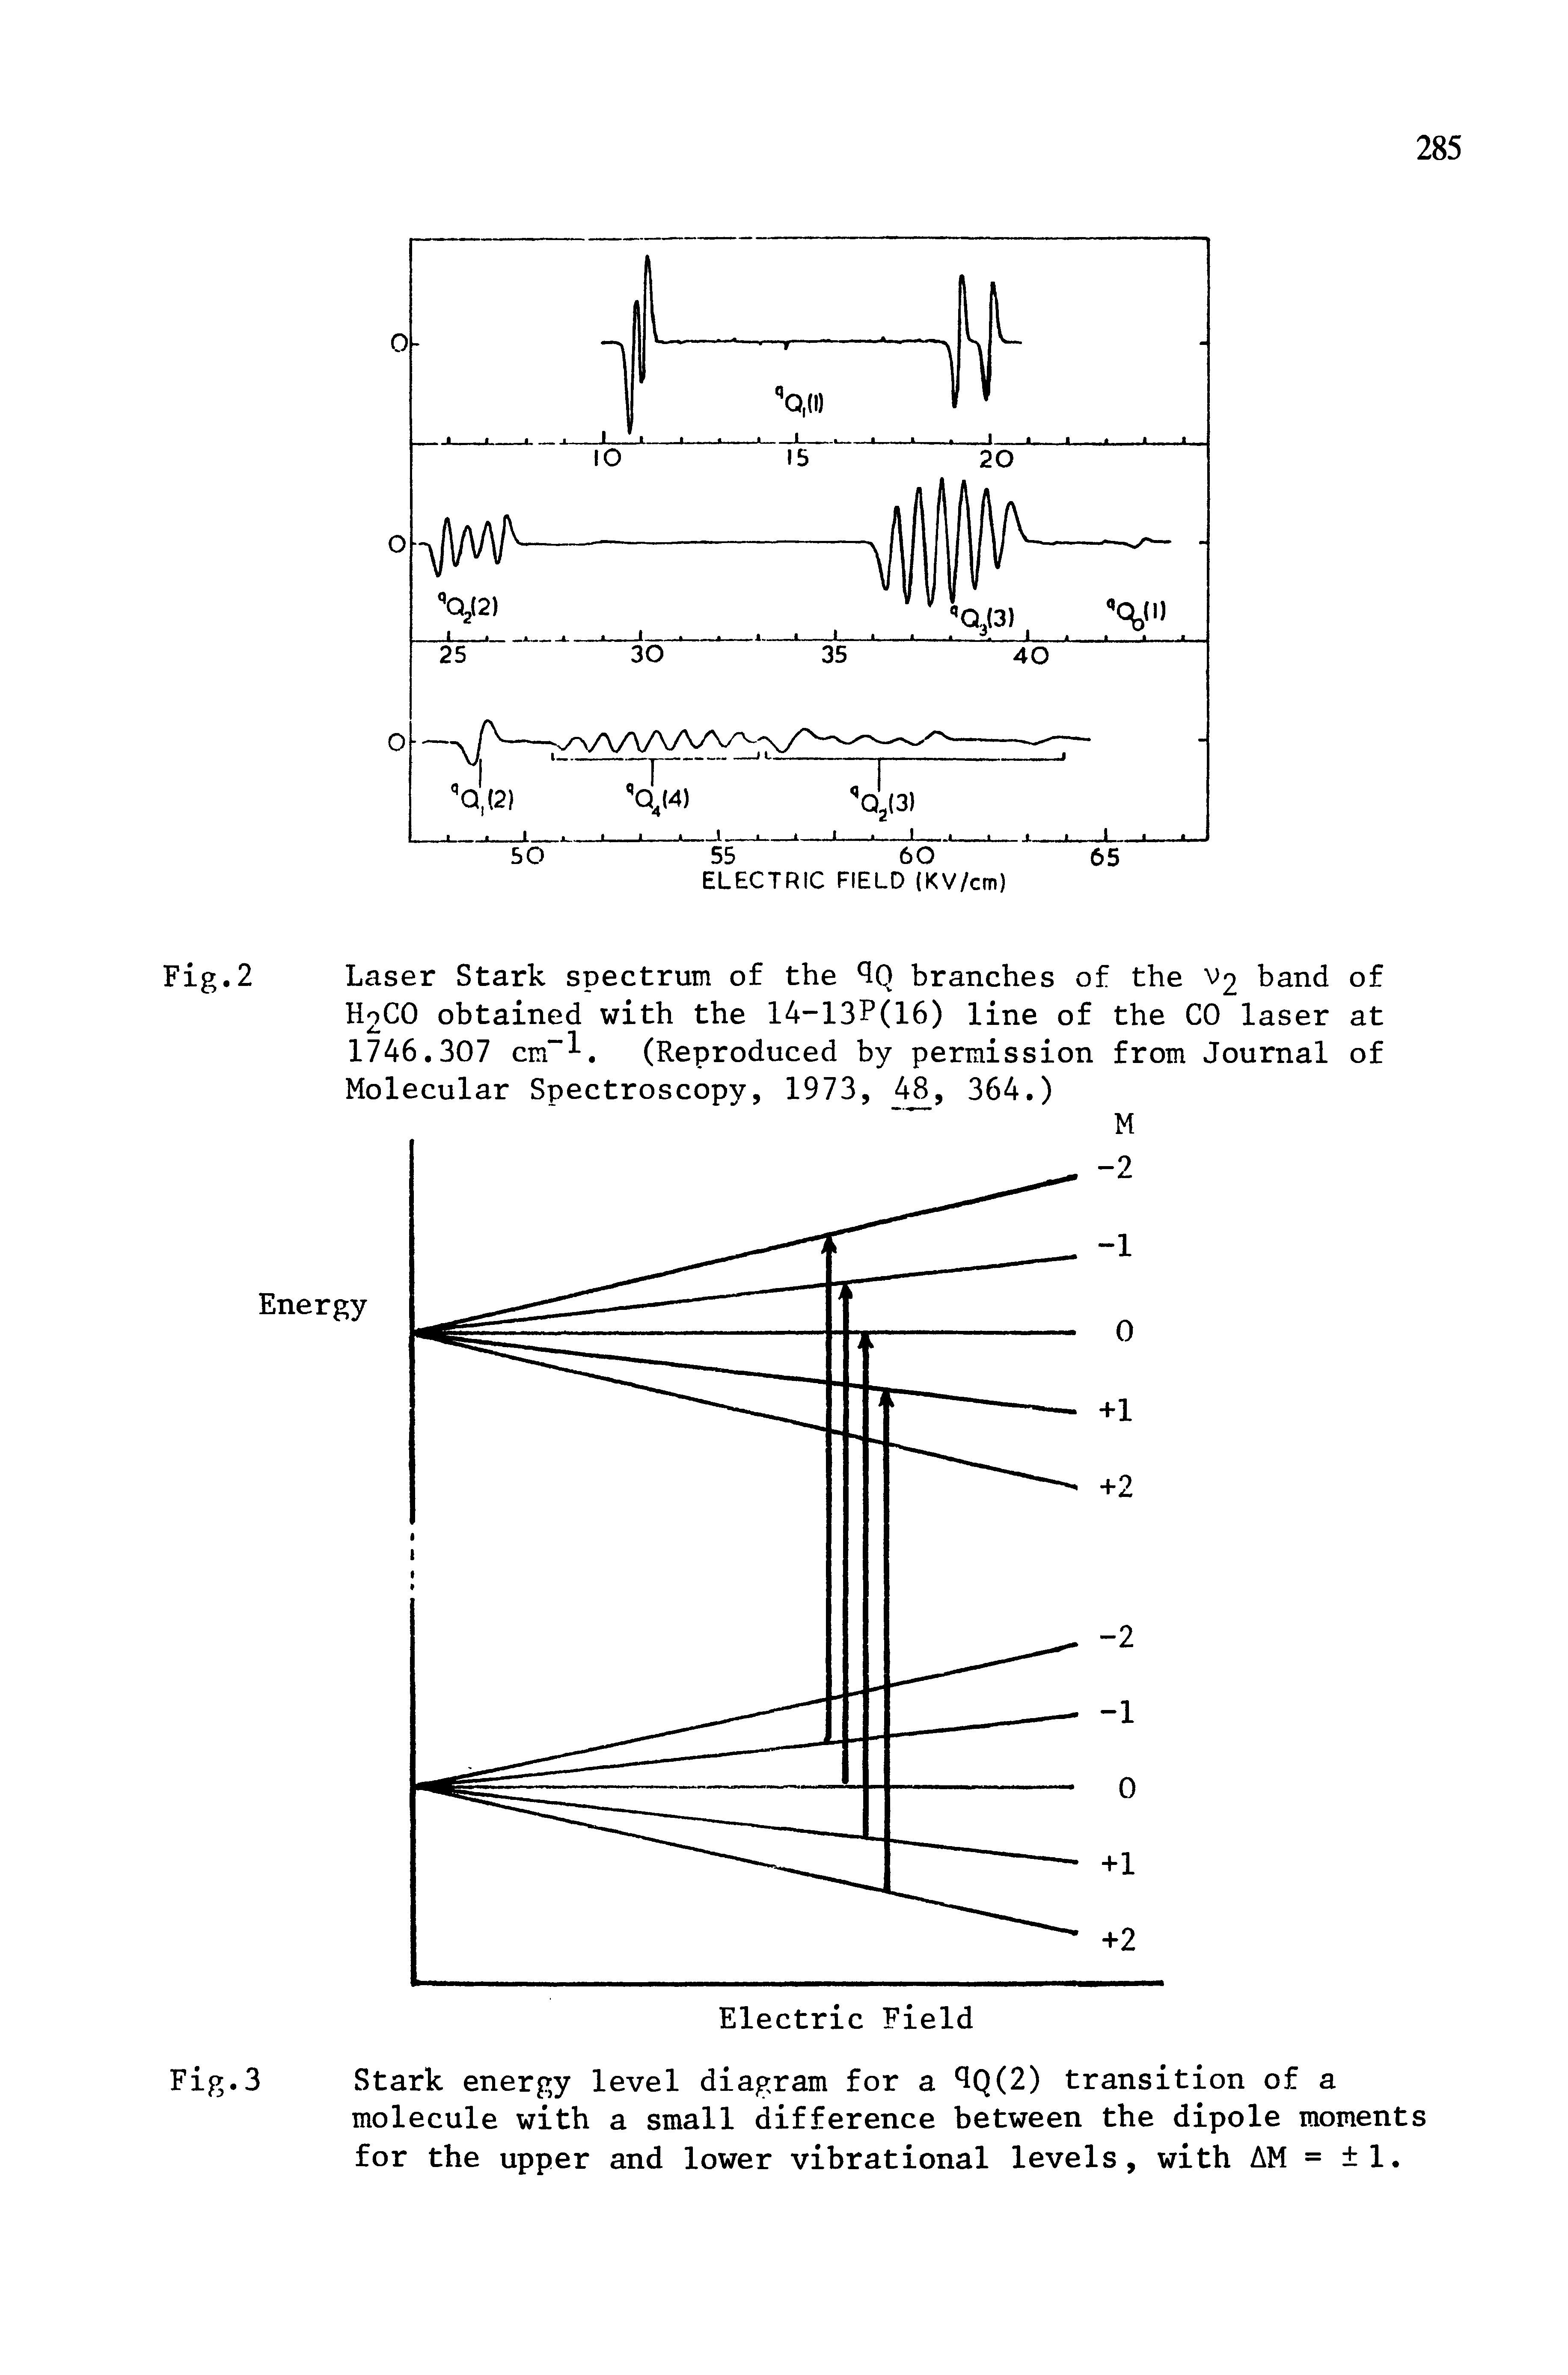 Fig.2 Laser Stark spectrum of the branches of the V2 band of H2CO obtained with the 14 13P(16) line of the CO laser at 1746.307 cm . (Reproduced by permission from Journal of Molecular Spectroscopy, 1973, 4, 364.)...